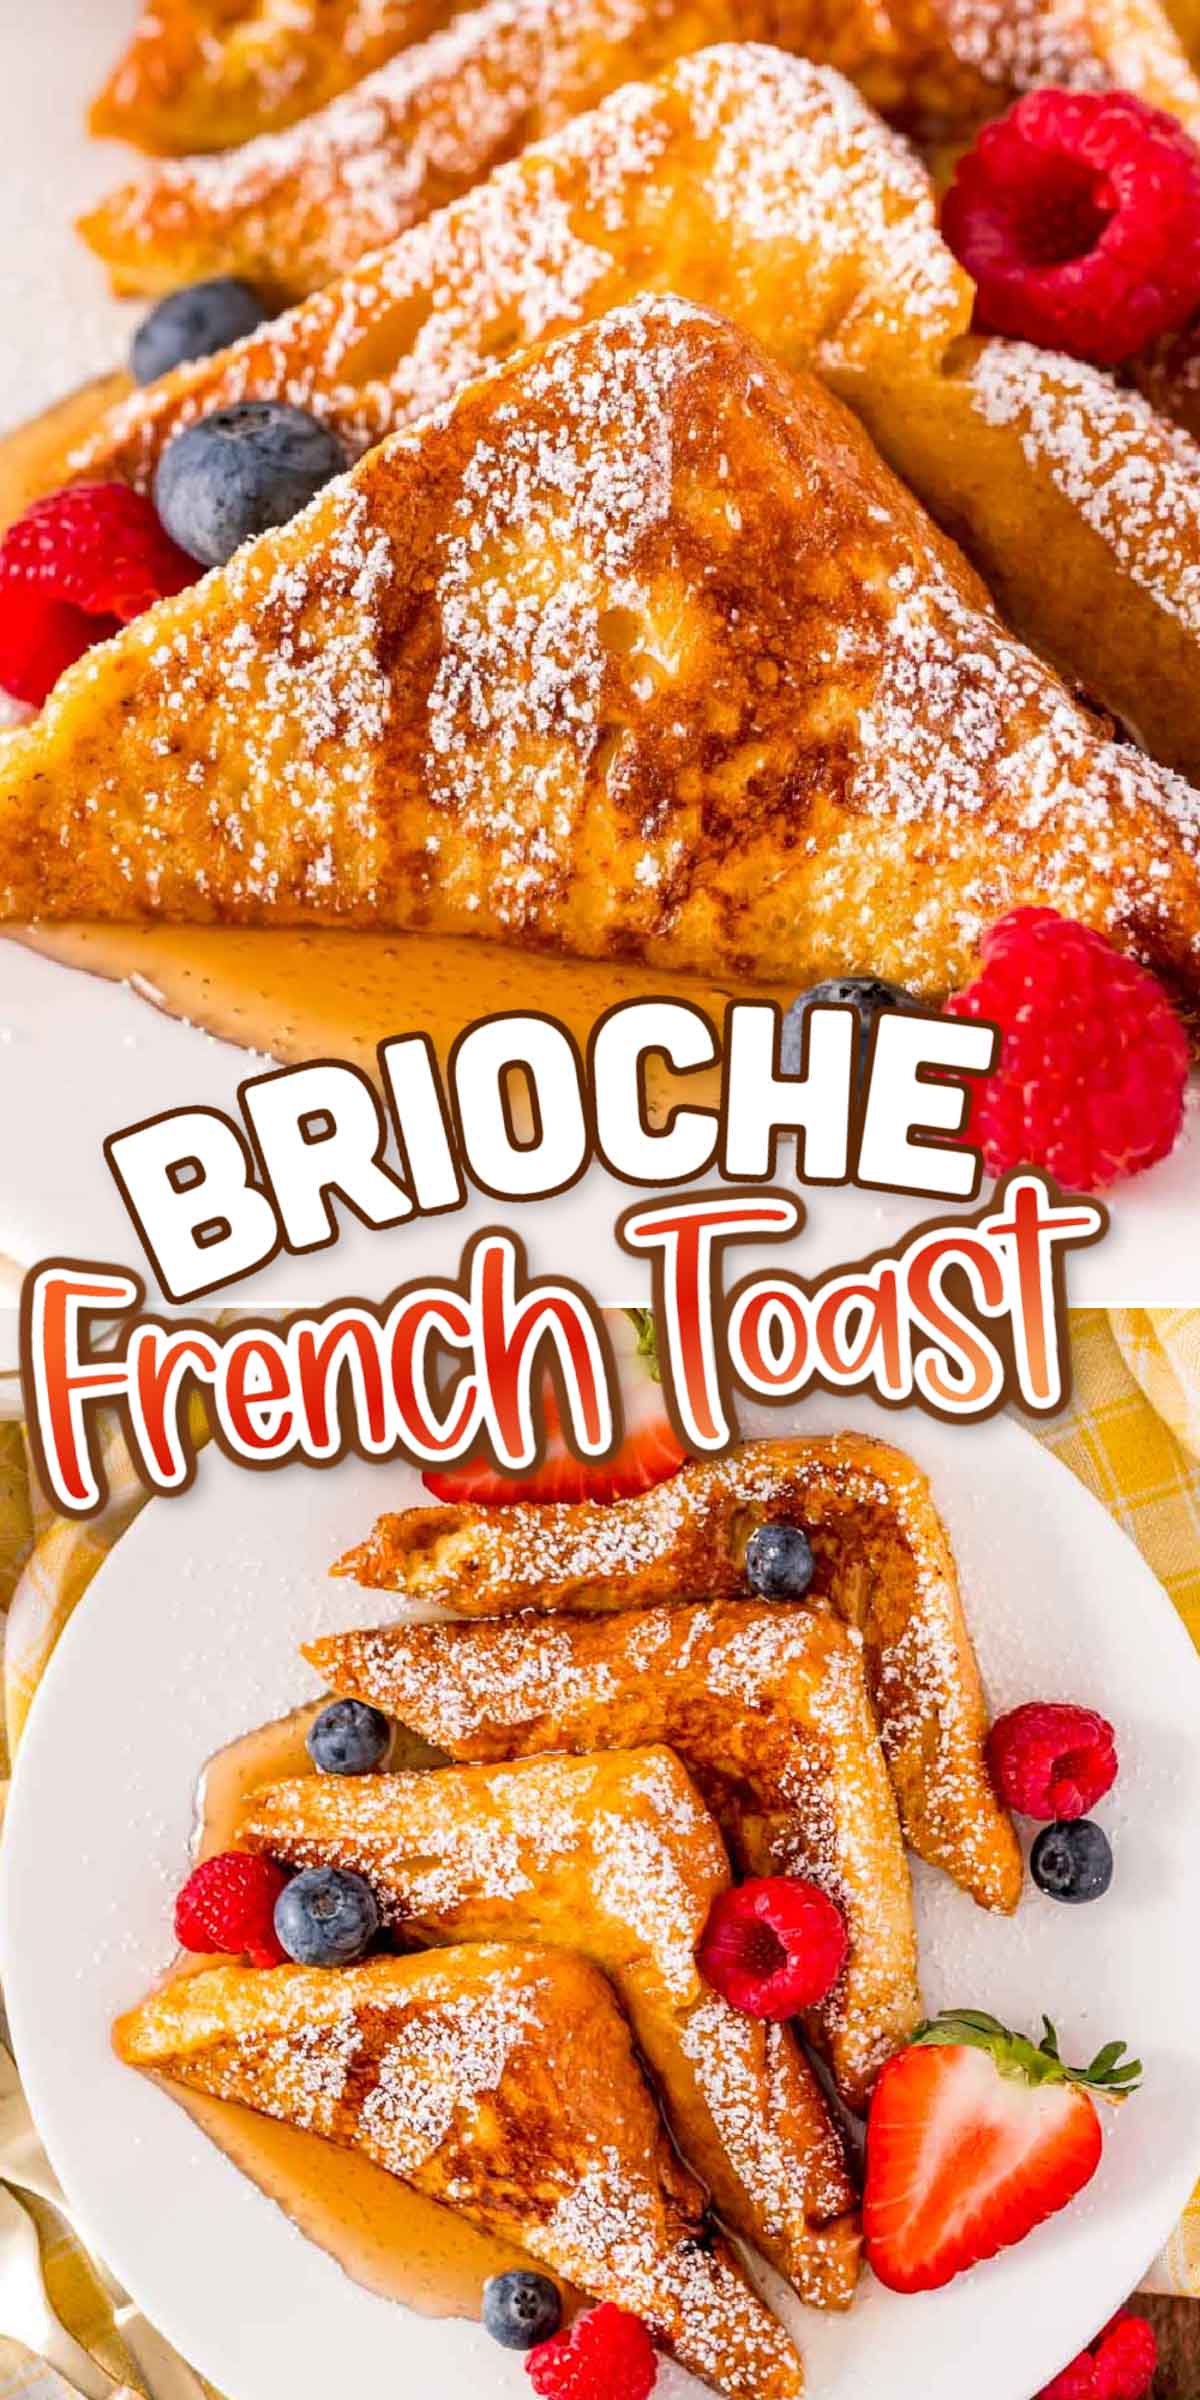 The Best Brioche French Toast is soaked in a rich and creamy egg wash, then cooked to a mouth-watering golden brown! A sweet breakfast option the whole family will be excited to see in the morning! via @sugarandsoulco